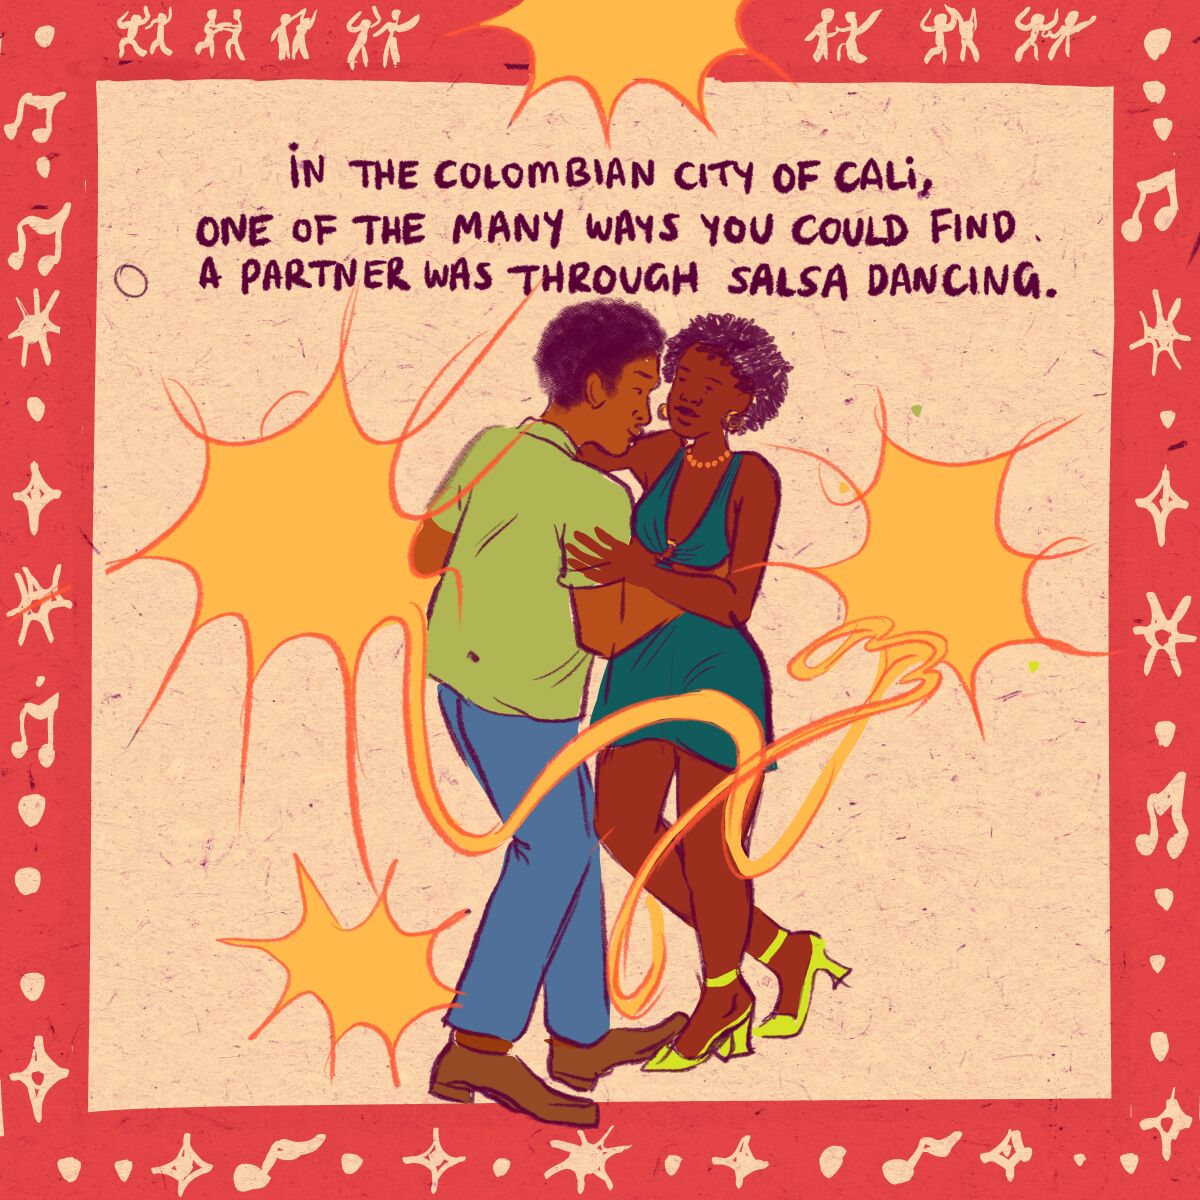 In the Colombian city of Cali, one of the ways to find a partner was through salsa 